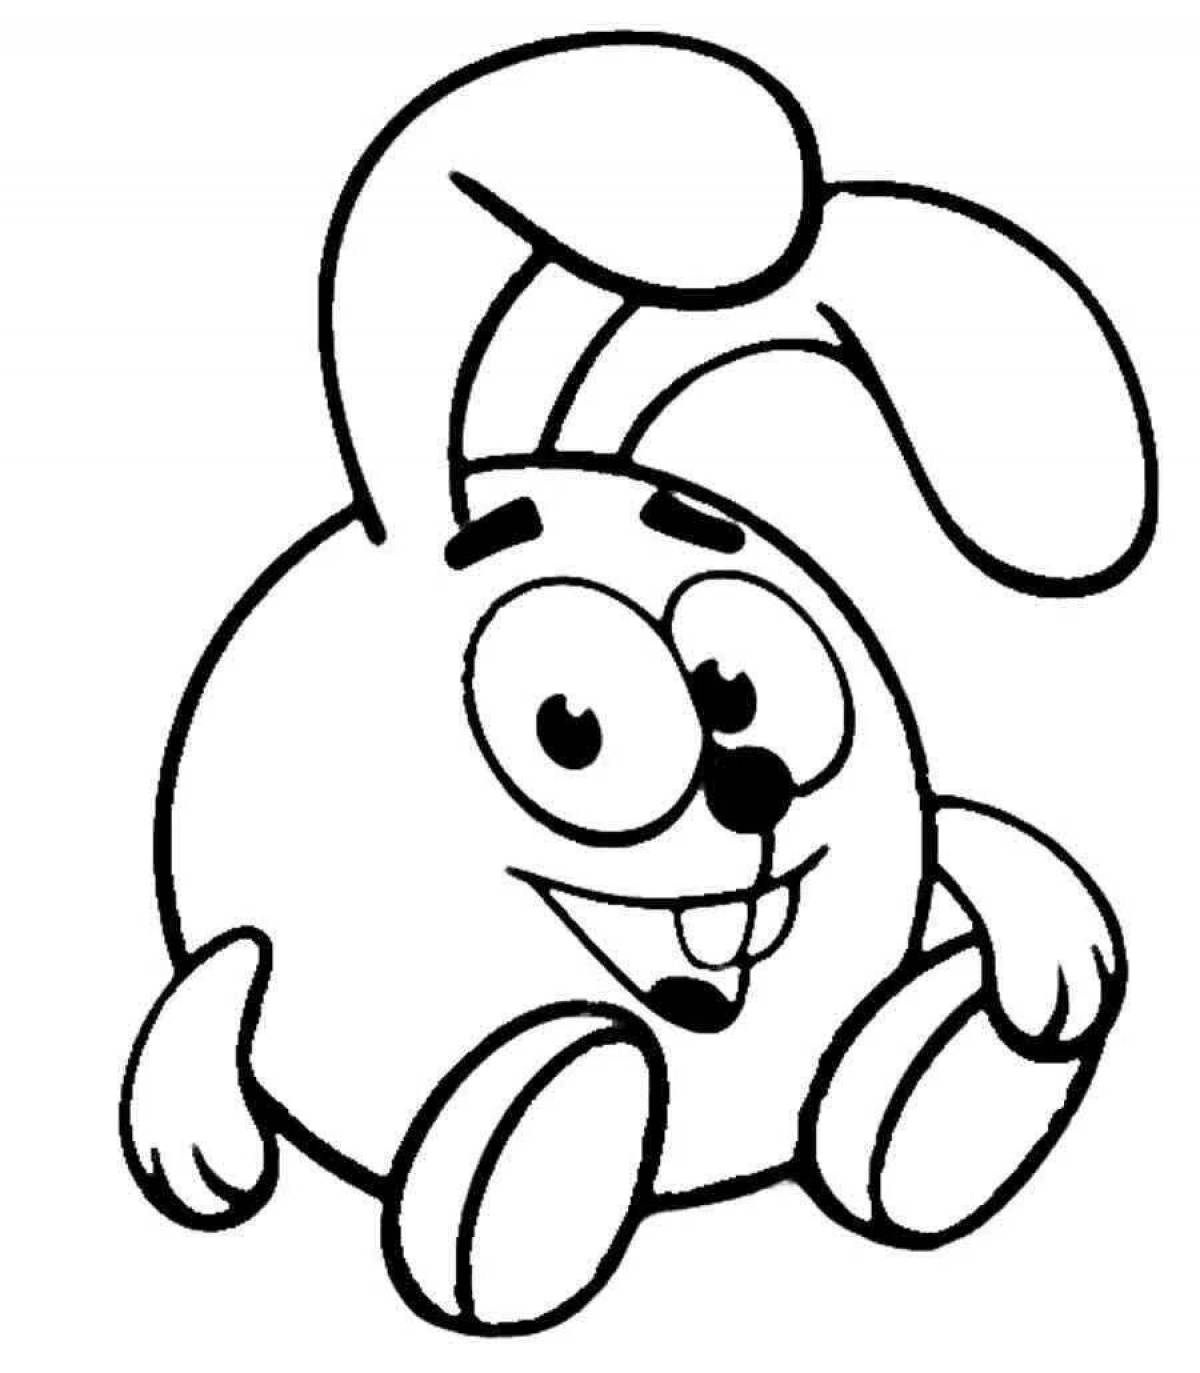 Funny cartoon easy coloring pages